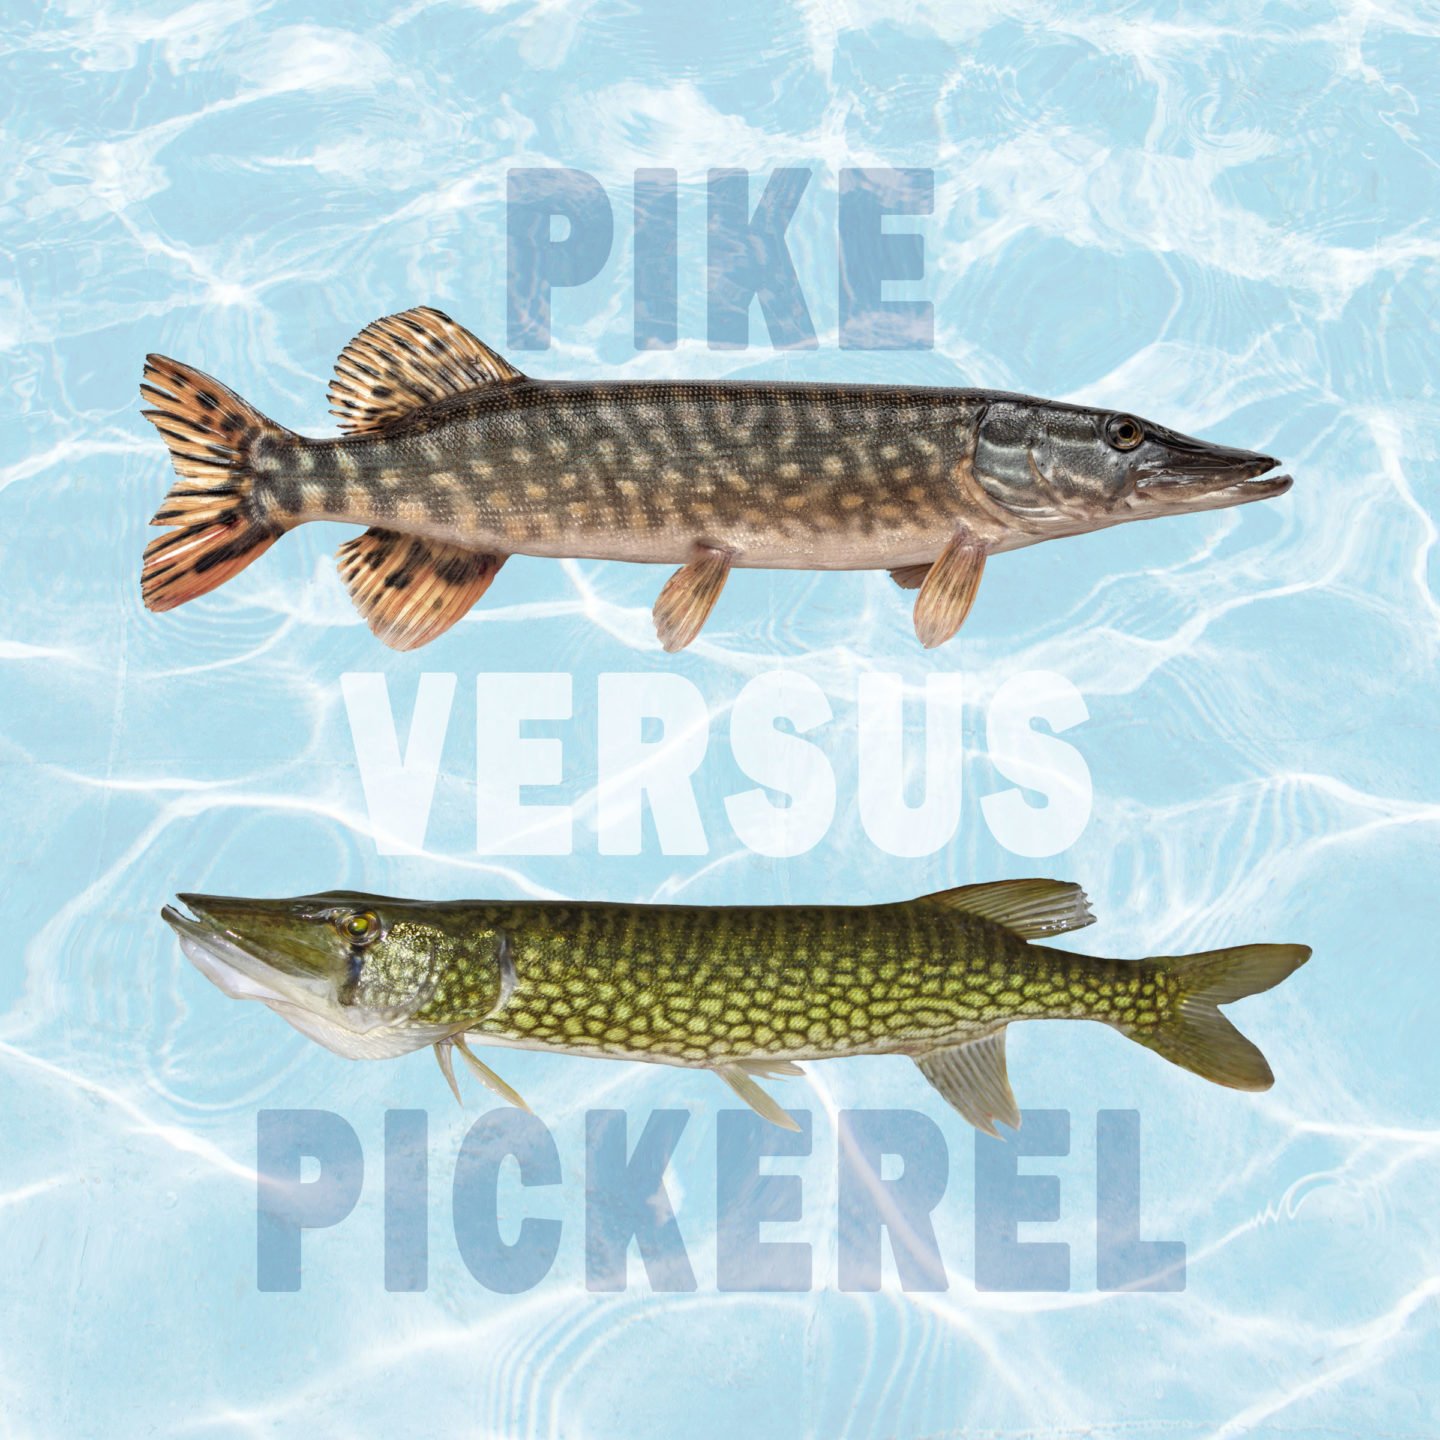 pike vs pickerel differences